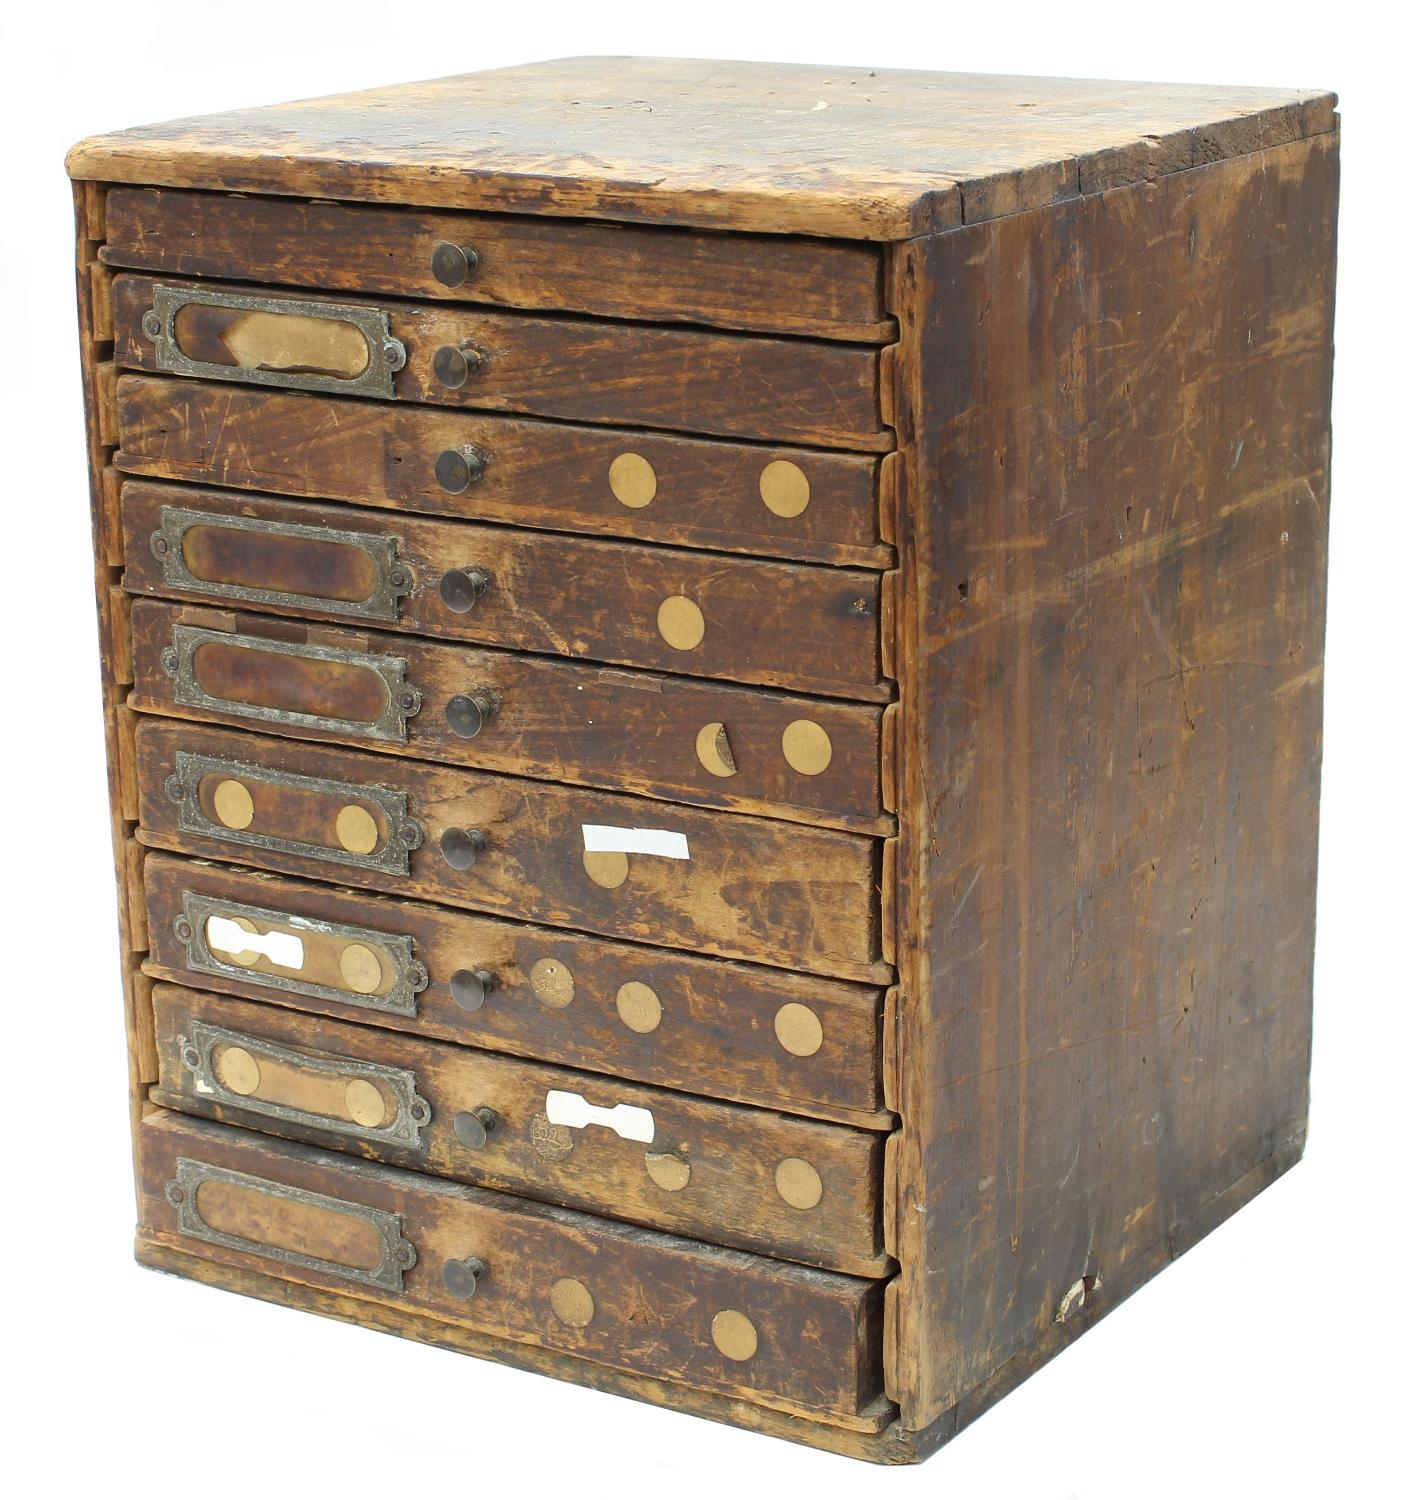 Nine drawer wooden chest containing a quantity of watch parts to include balance staffs, balances